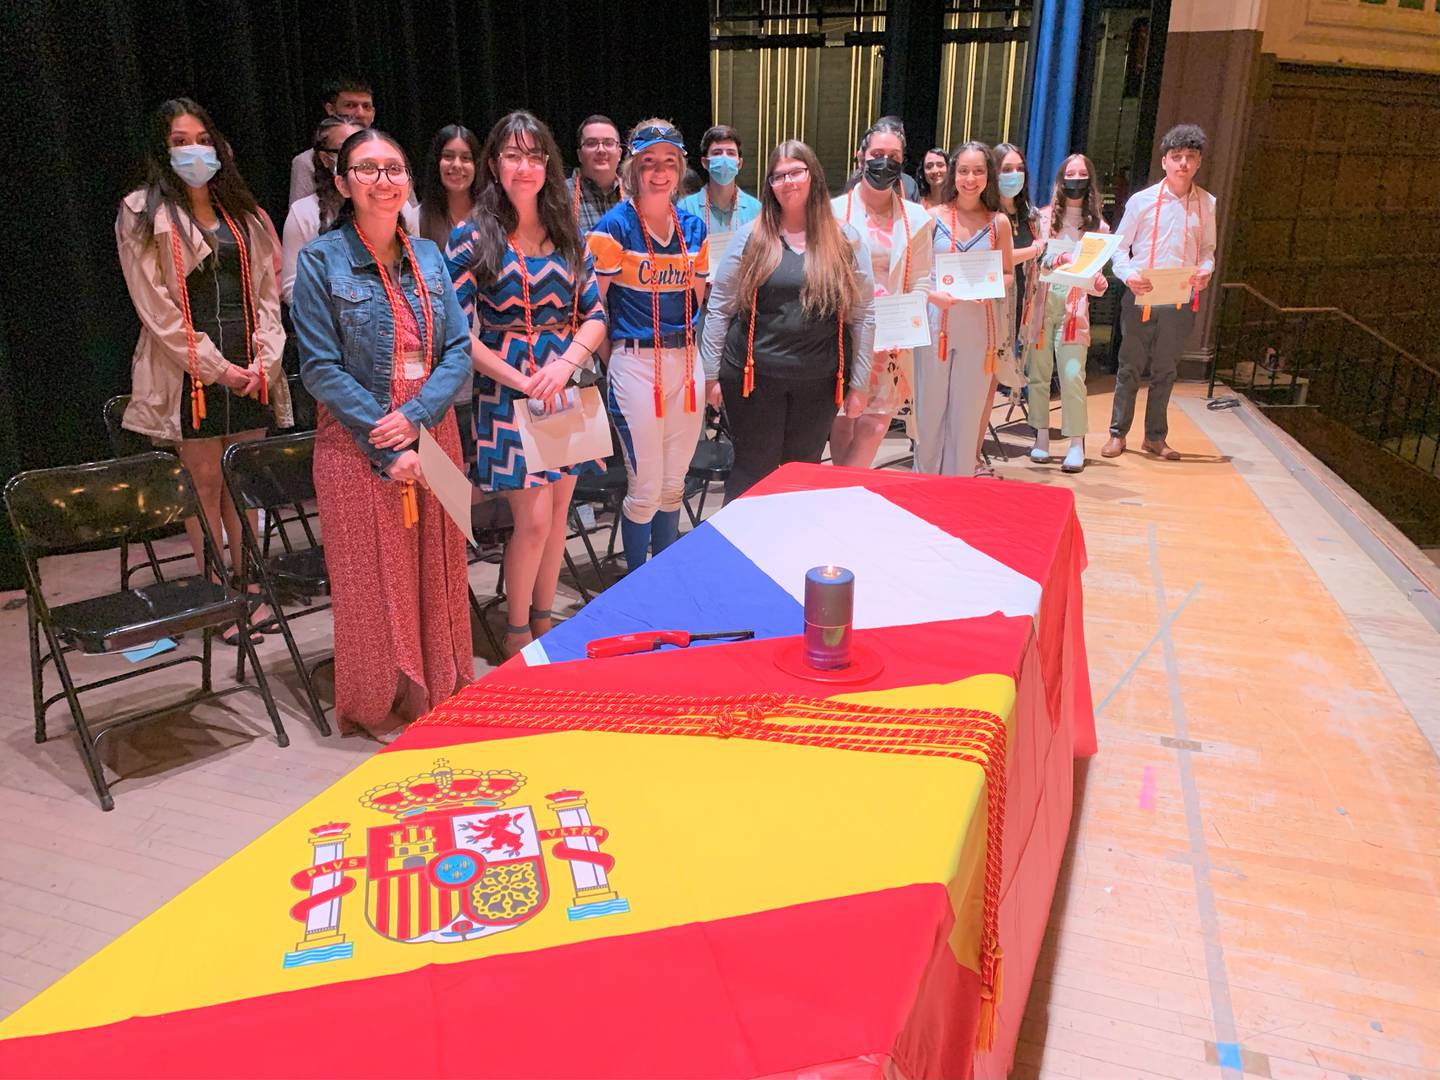 Joliet Central High School inducted 47 students into the French and Spanish National Honors Societies on Wednesday, March 16, 2022. Pictured are some of the the 2022 Spanish National Honor Society inductees.